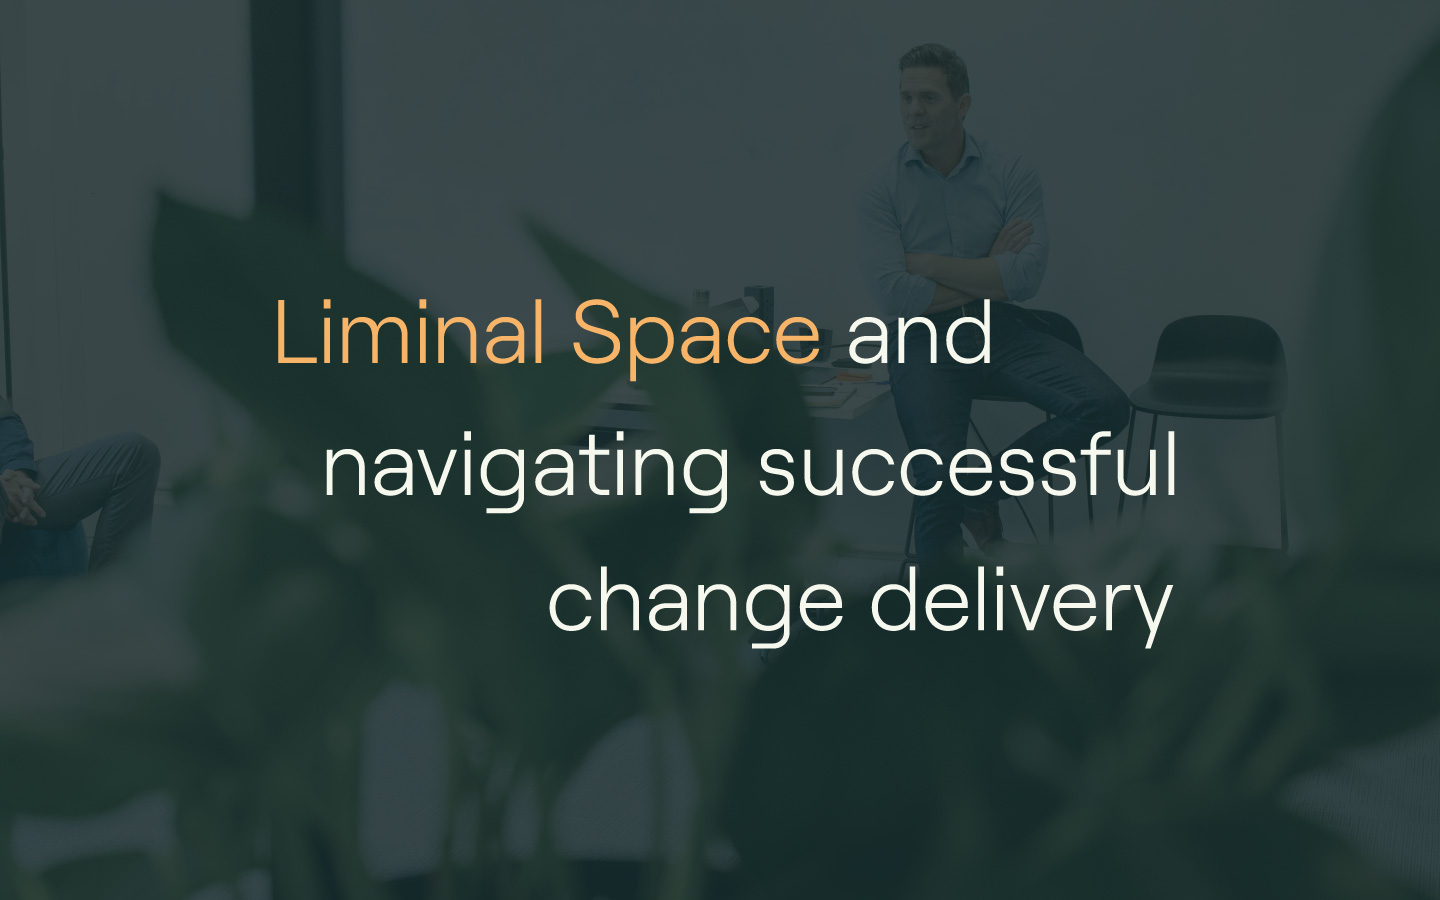 Liminal space and navigating successful business change delivery